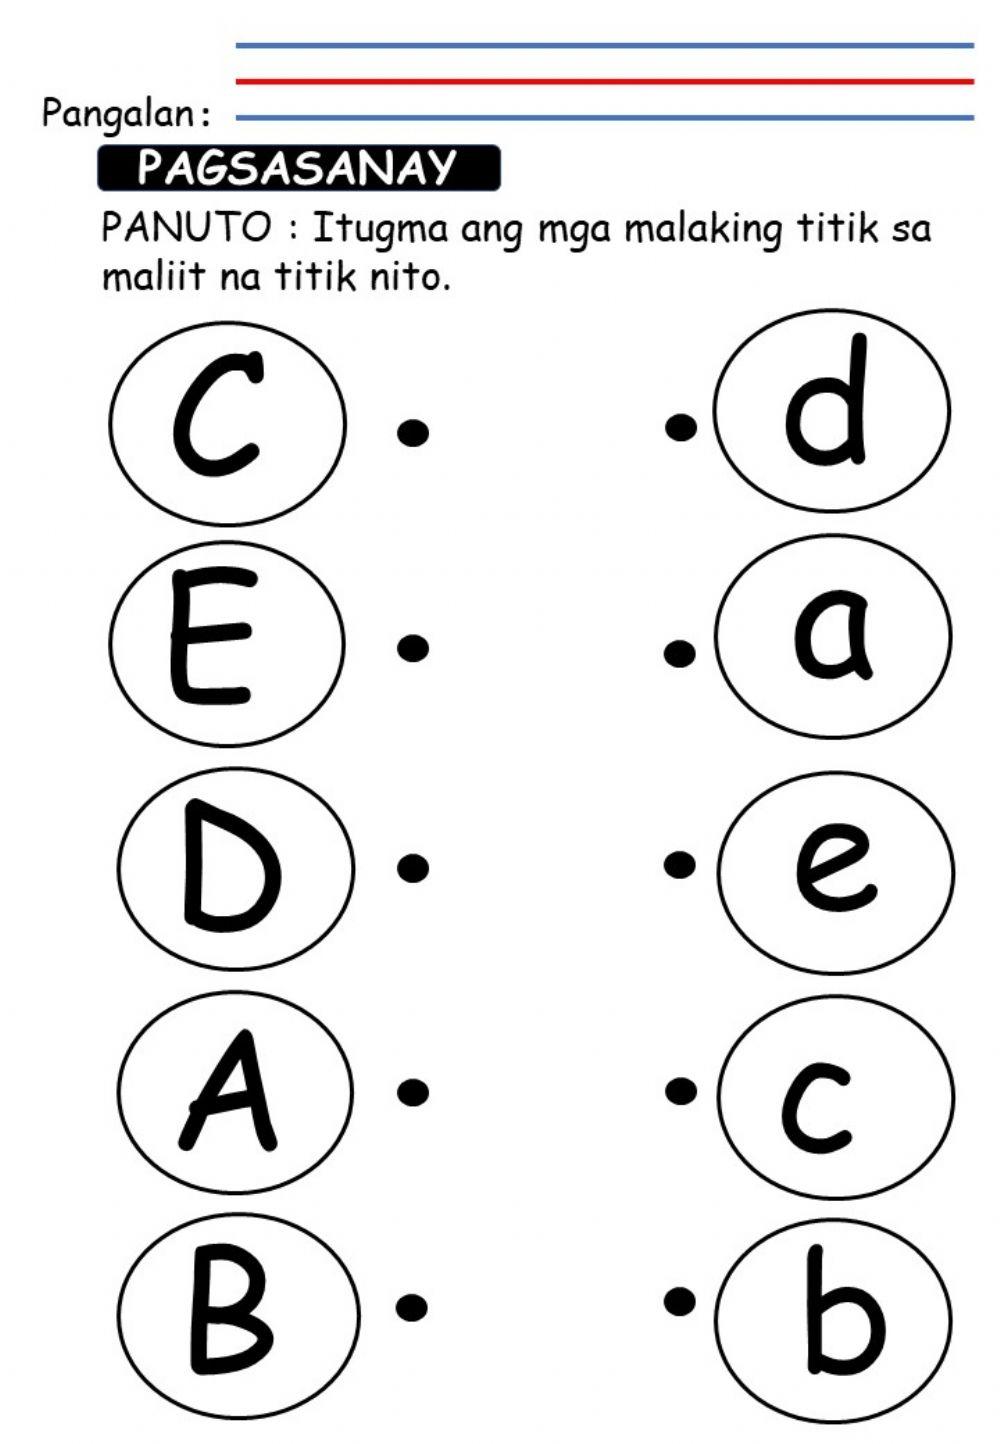 matching big letter to small letter A-E